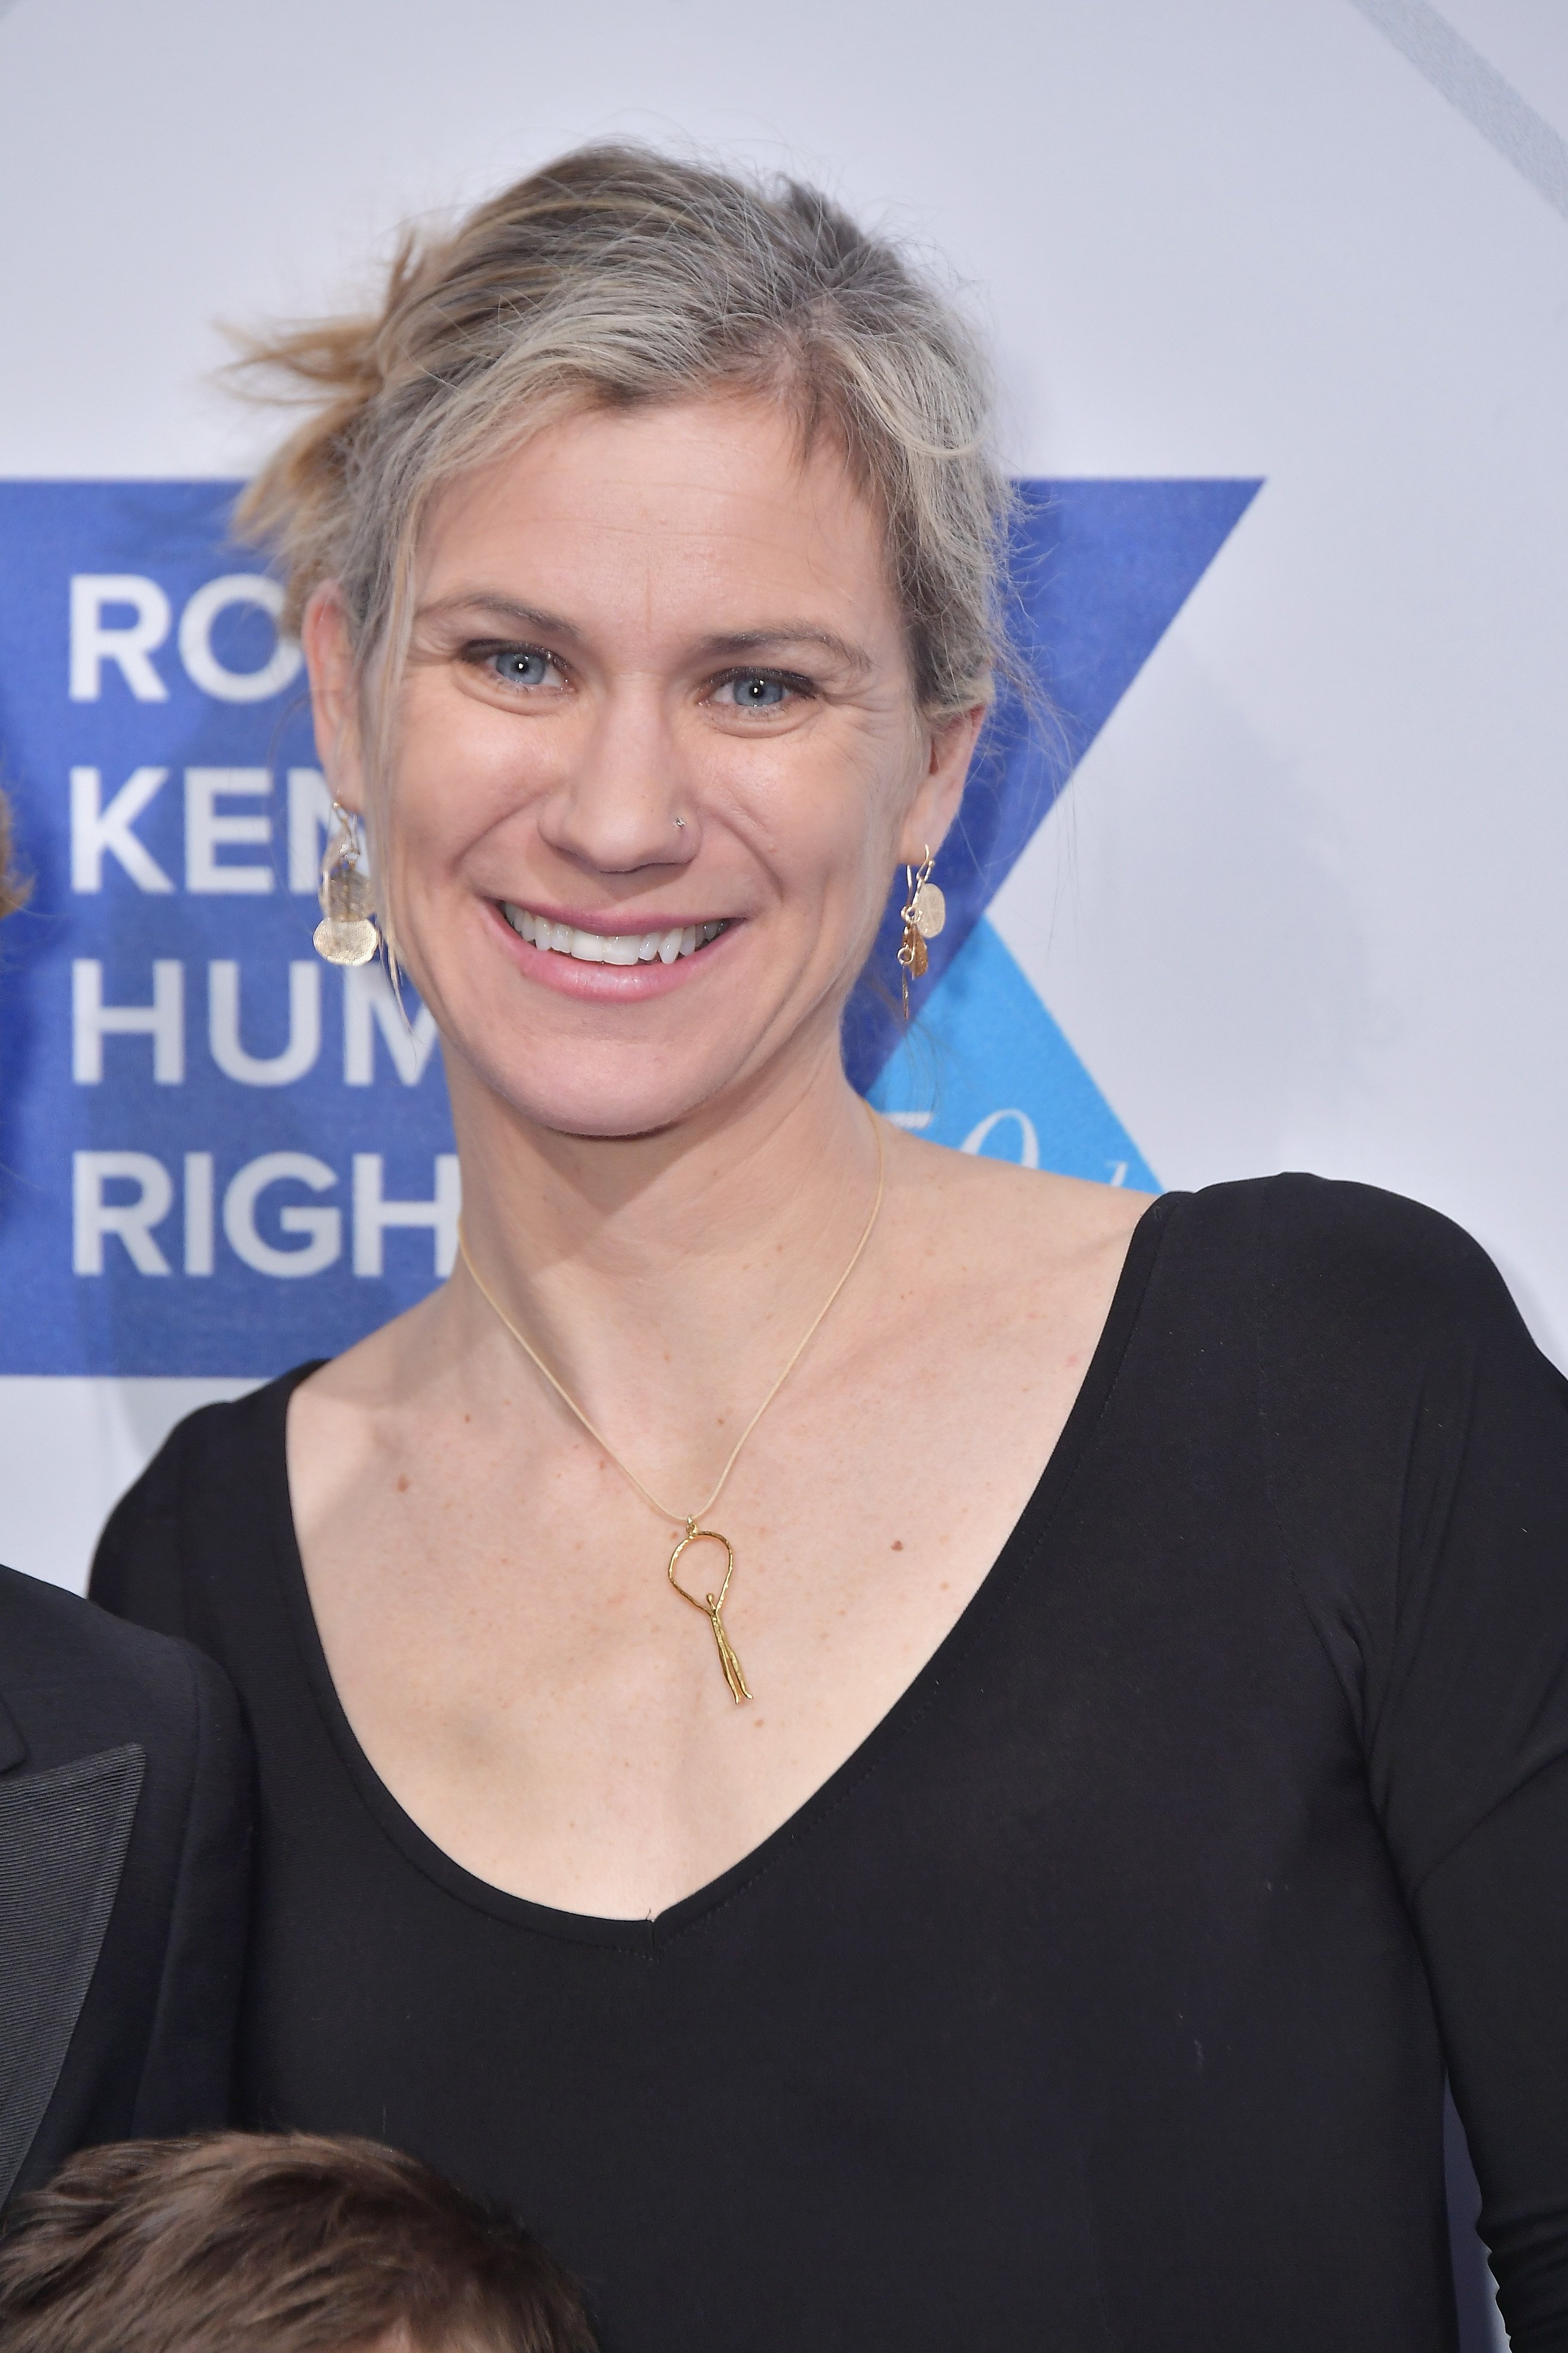 Maeve McKean attends the 2019 Robert F. Kennedy Human Rights Ripple Of Hope Awards on December 12, 2018, in New York City. | Source: Getty Images.